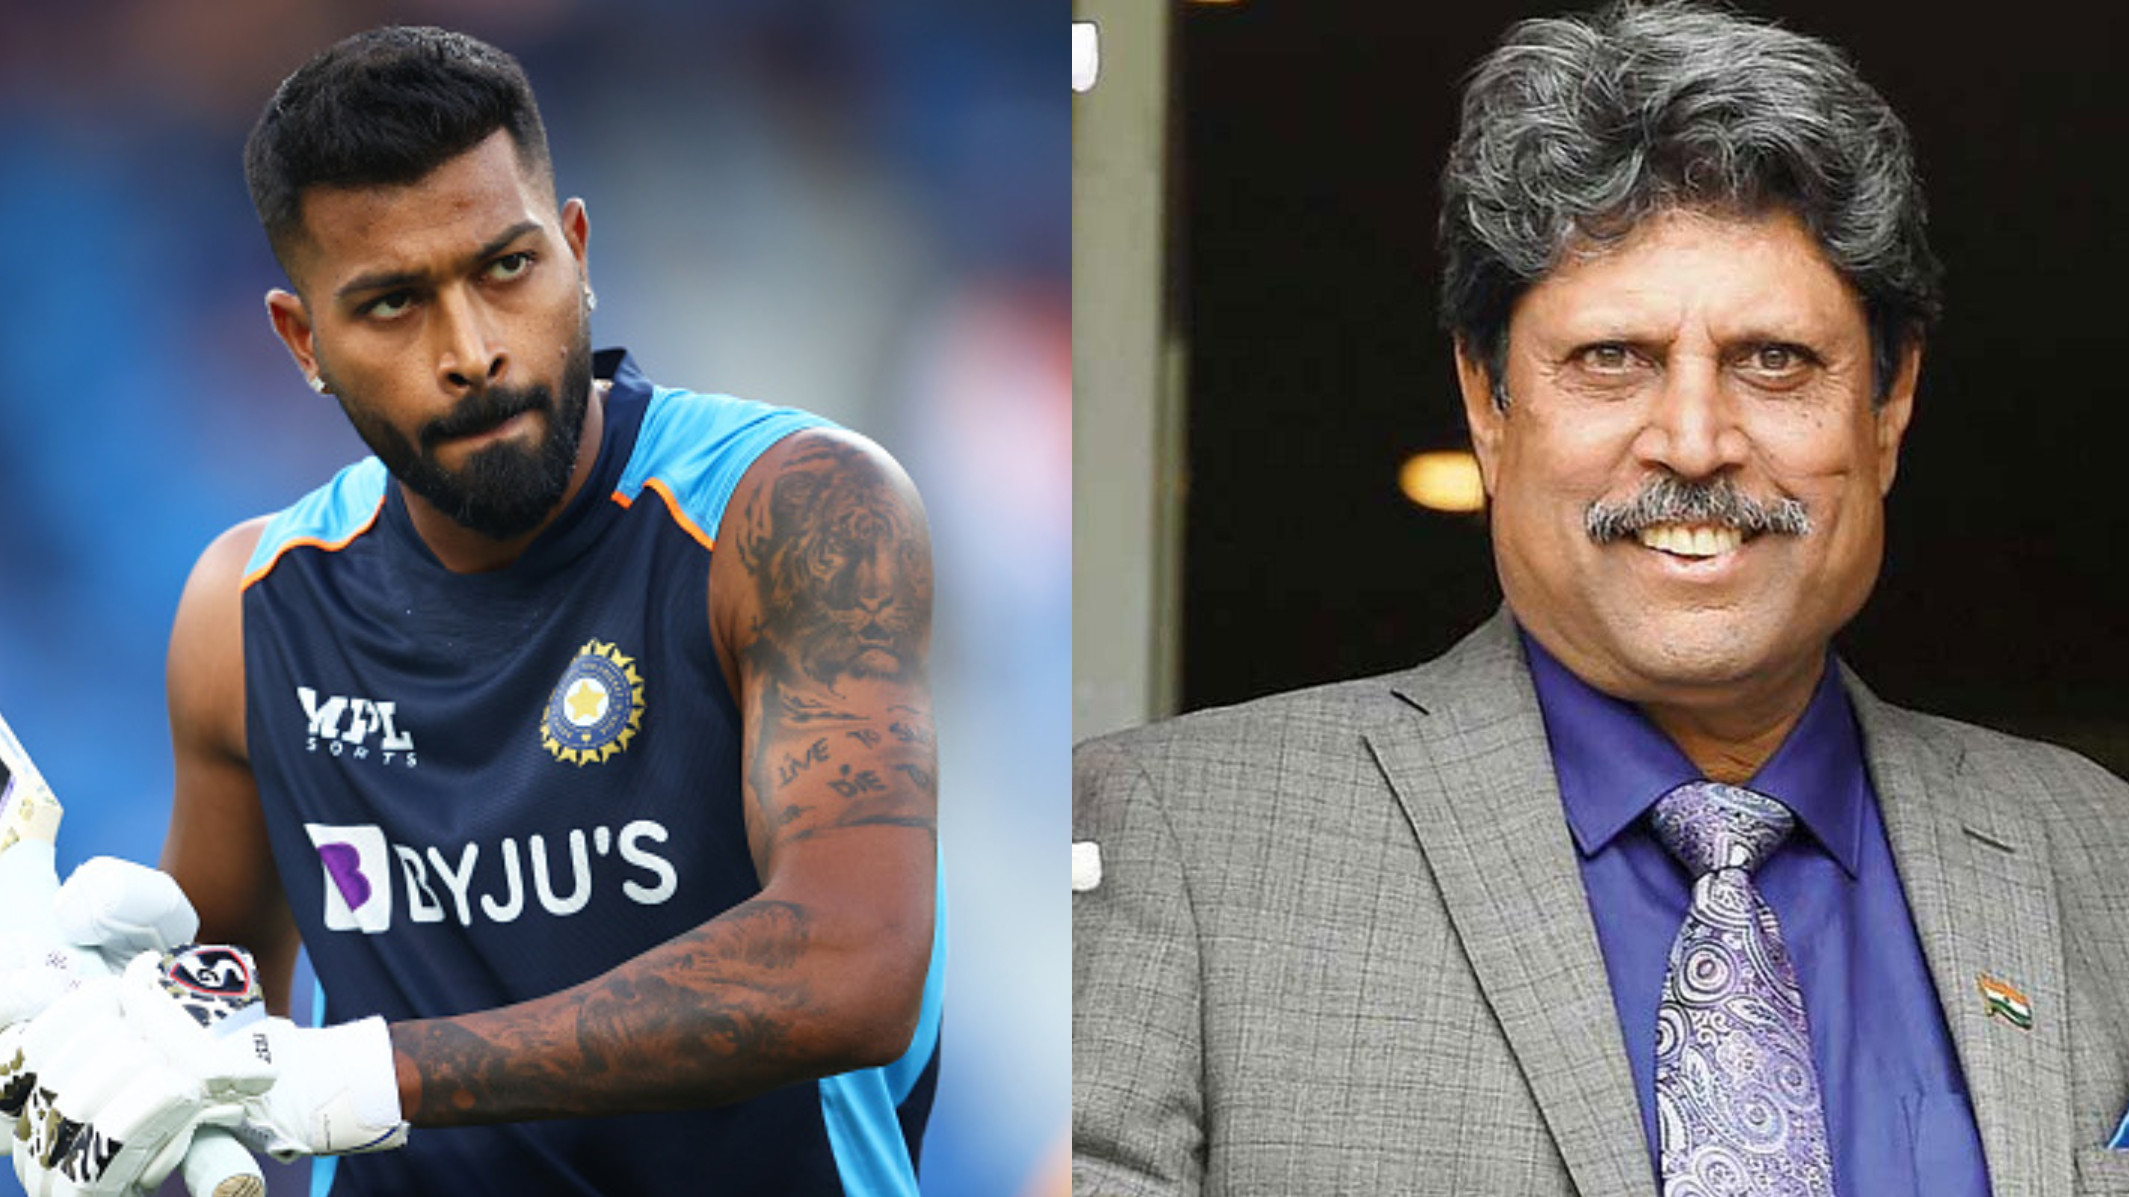 I can’t come close to Kapil Dev at the end of the day- Hardik Pandya on comparisons with the legend